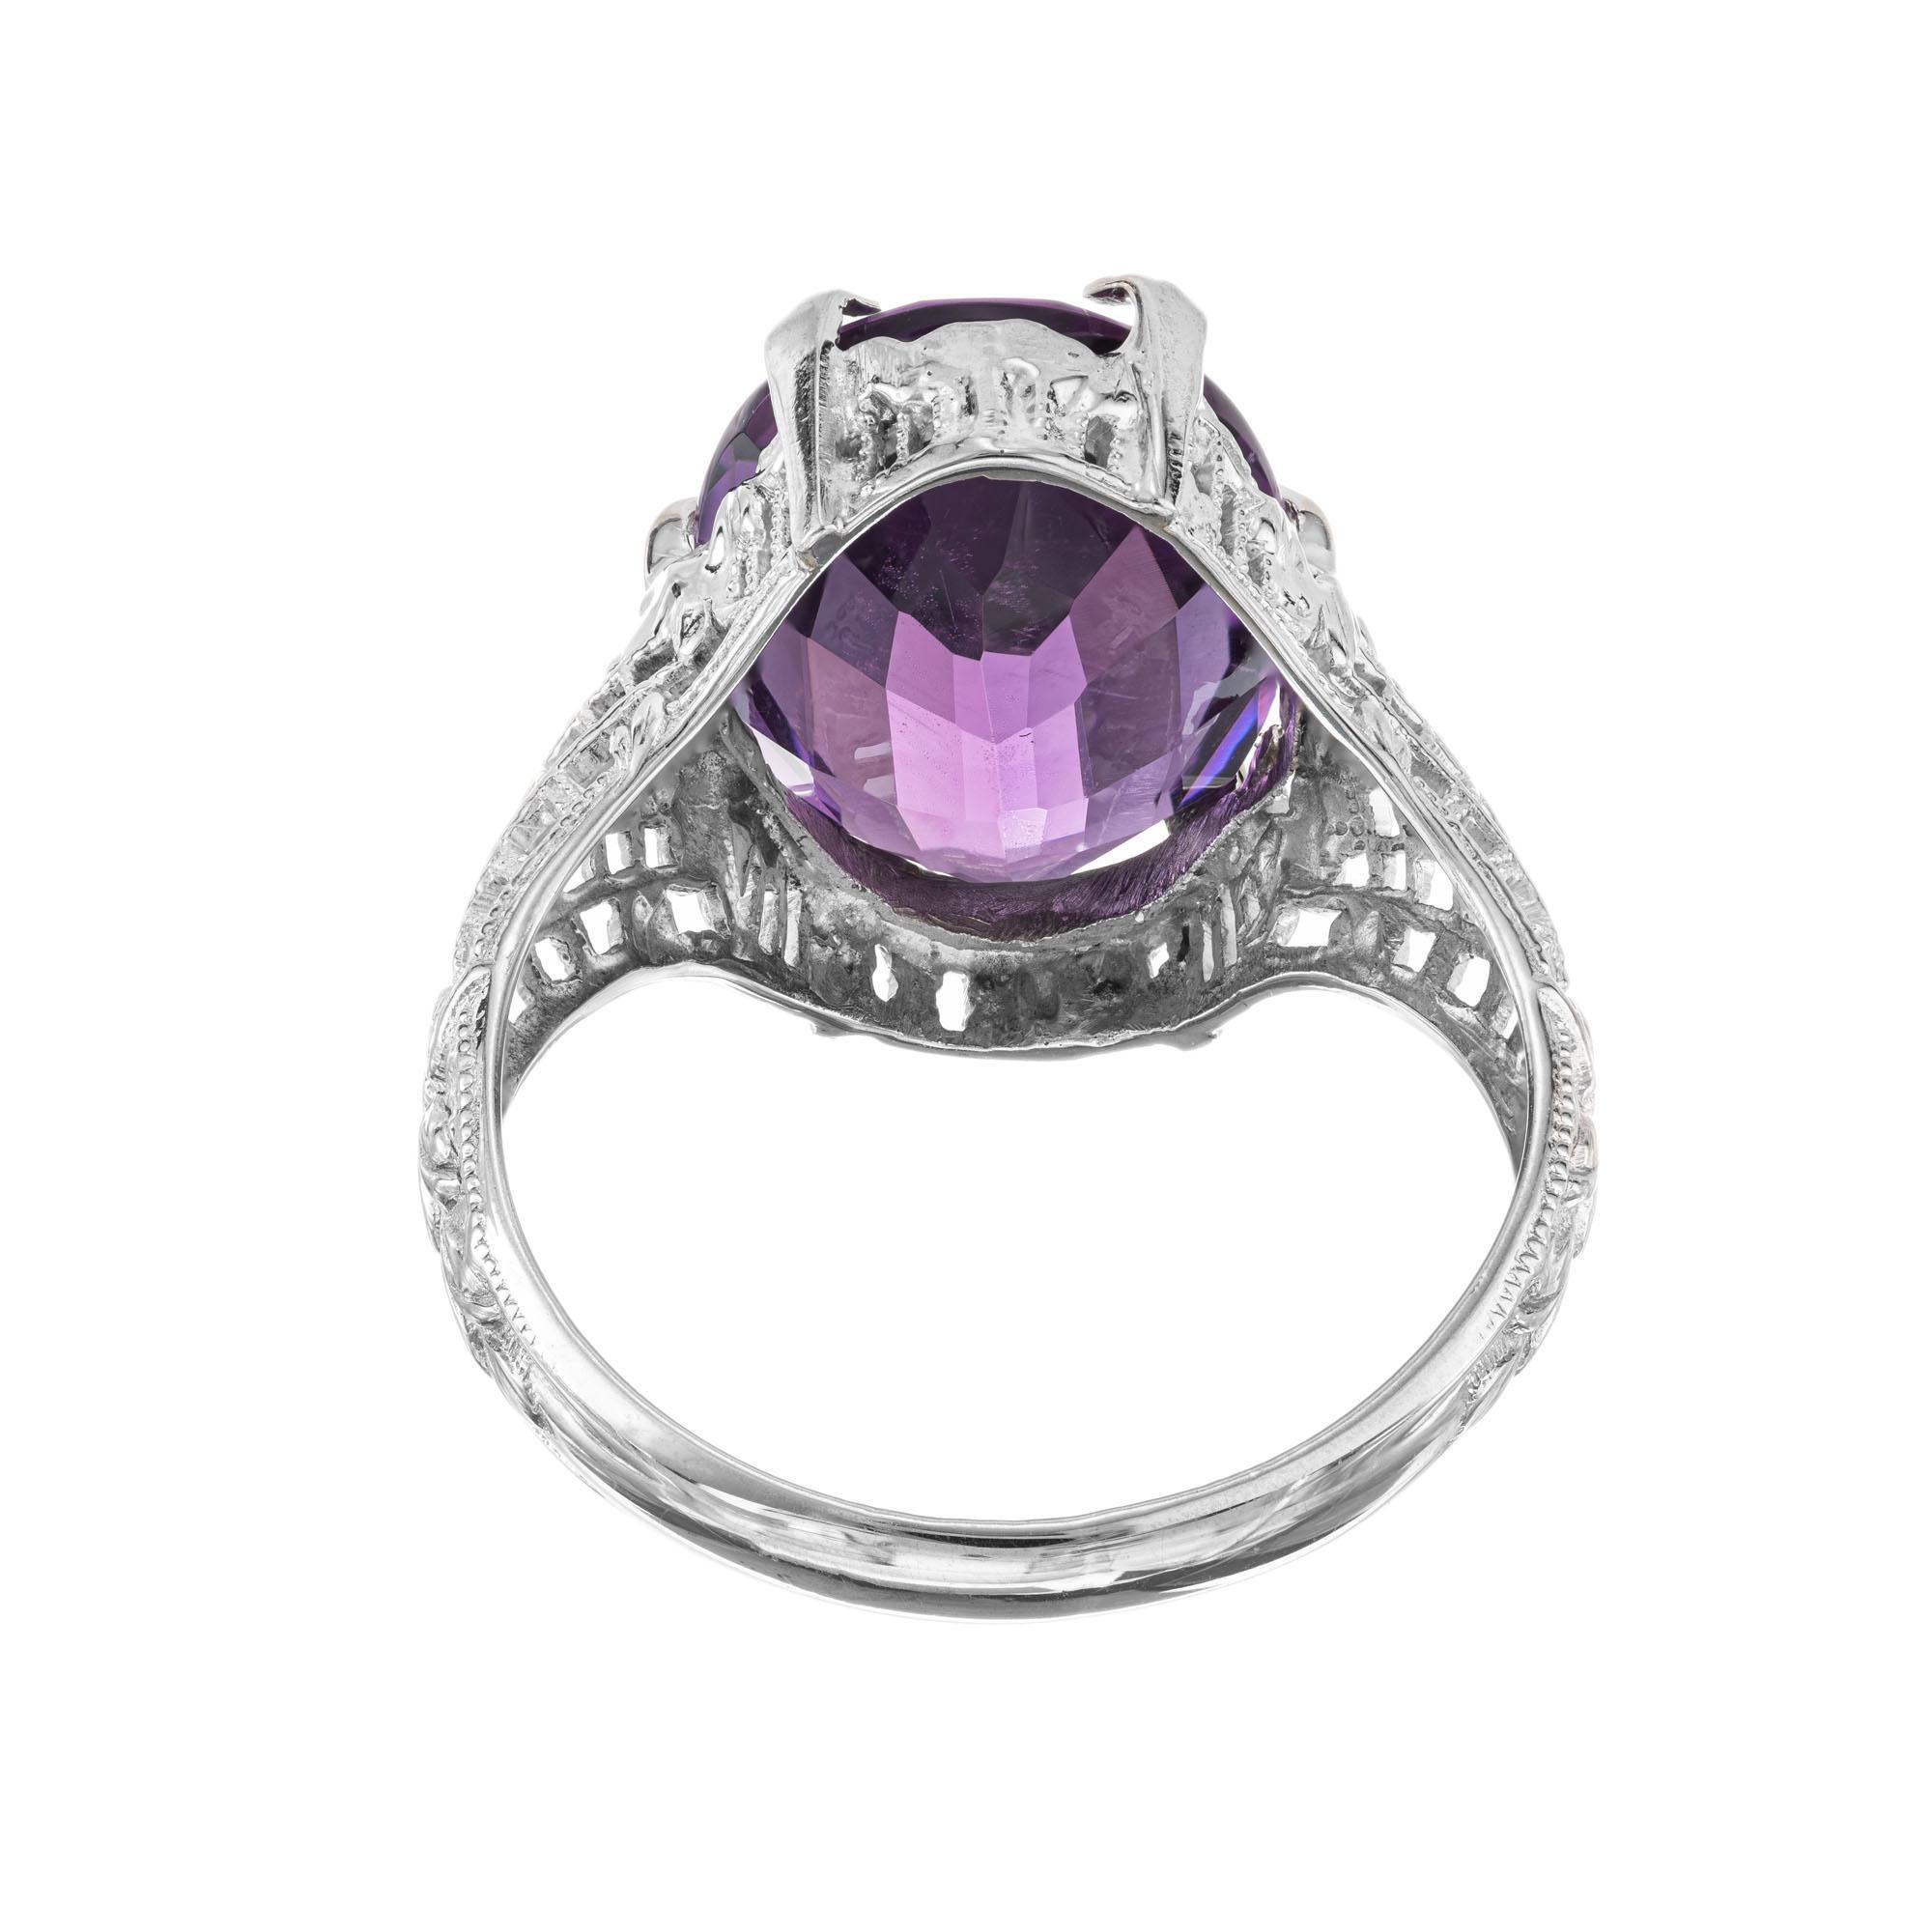 5.00 Carat Oval Bright Purple Amethyst Filigree Gold Ring For Sale 1